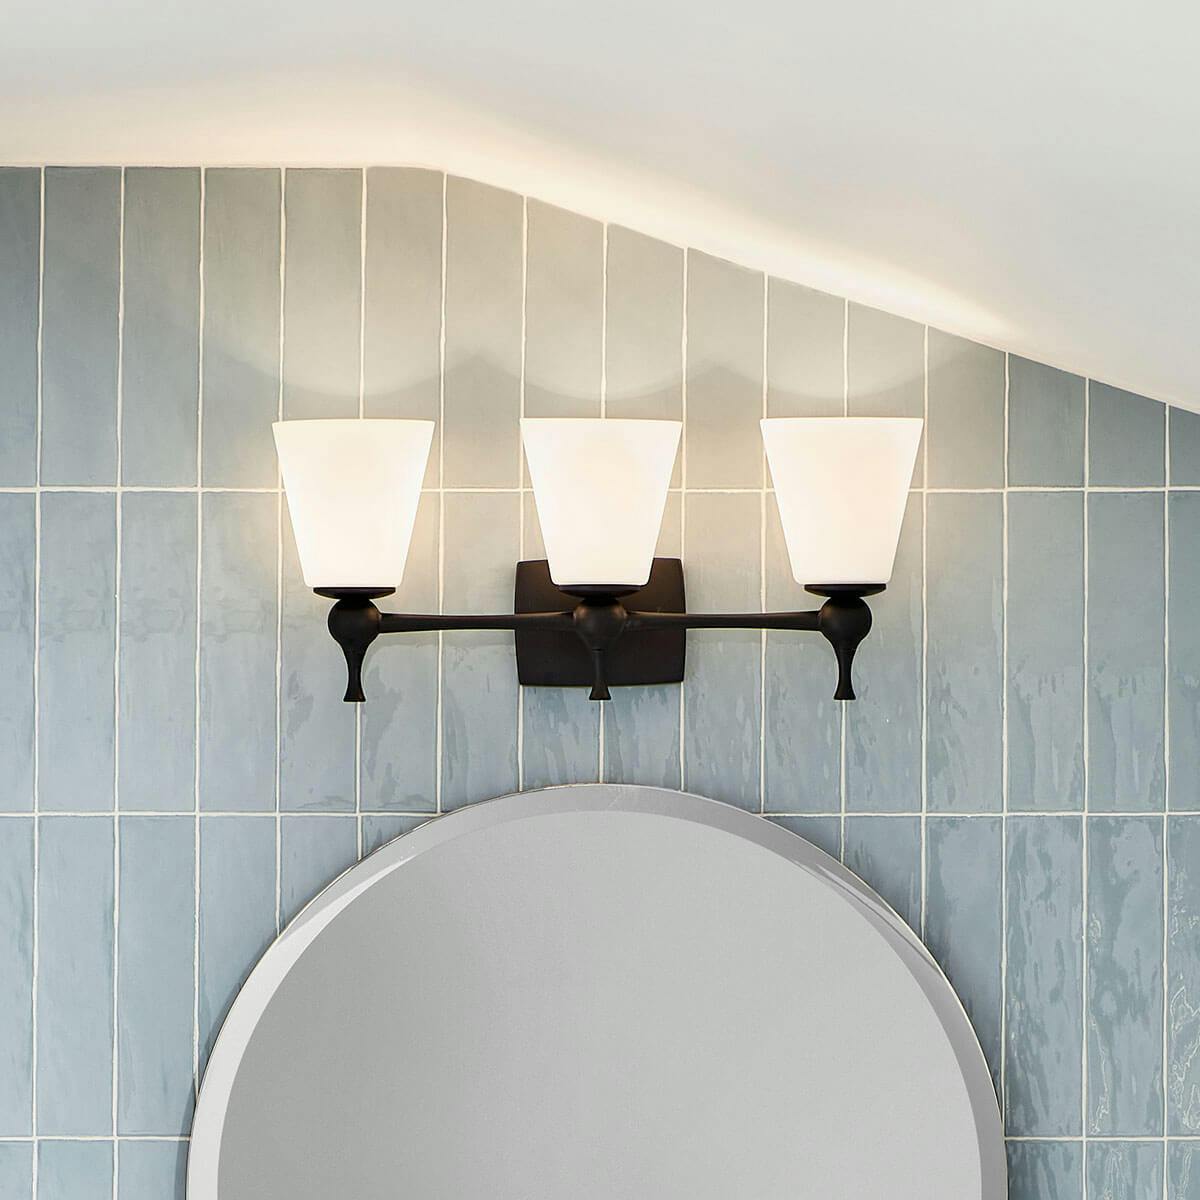 Day time Bathroom image featuring Cosabella vanity light 55092BK